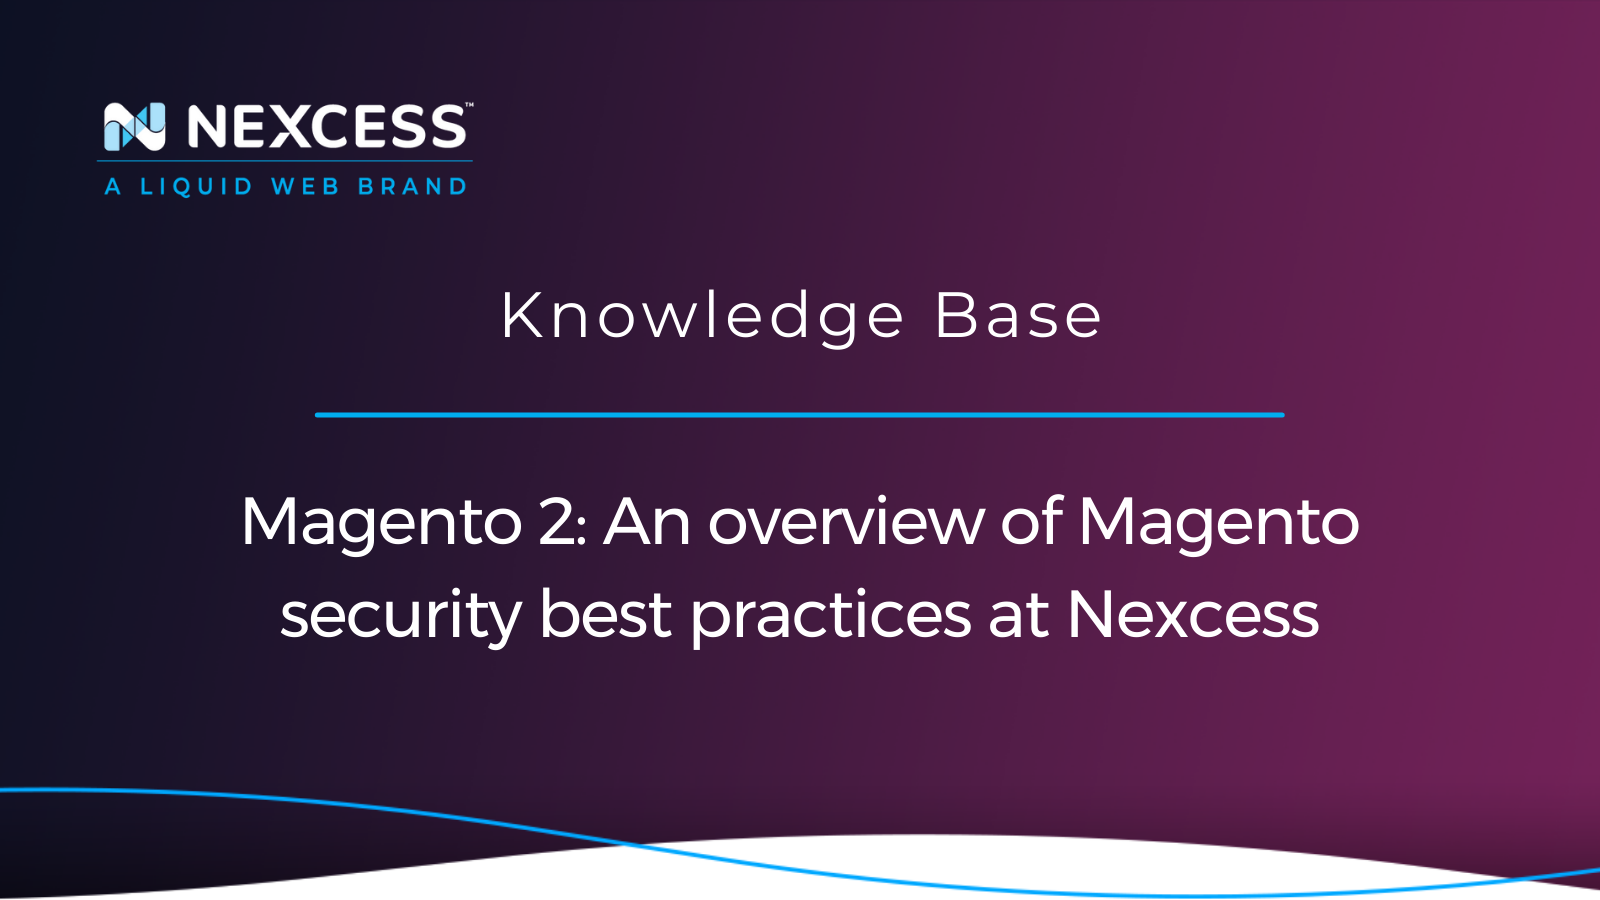 Magento 2: An overview of Magento security best practices at Nexcess